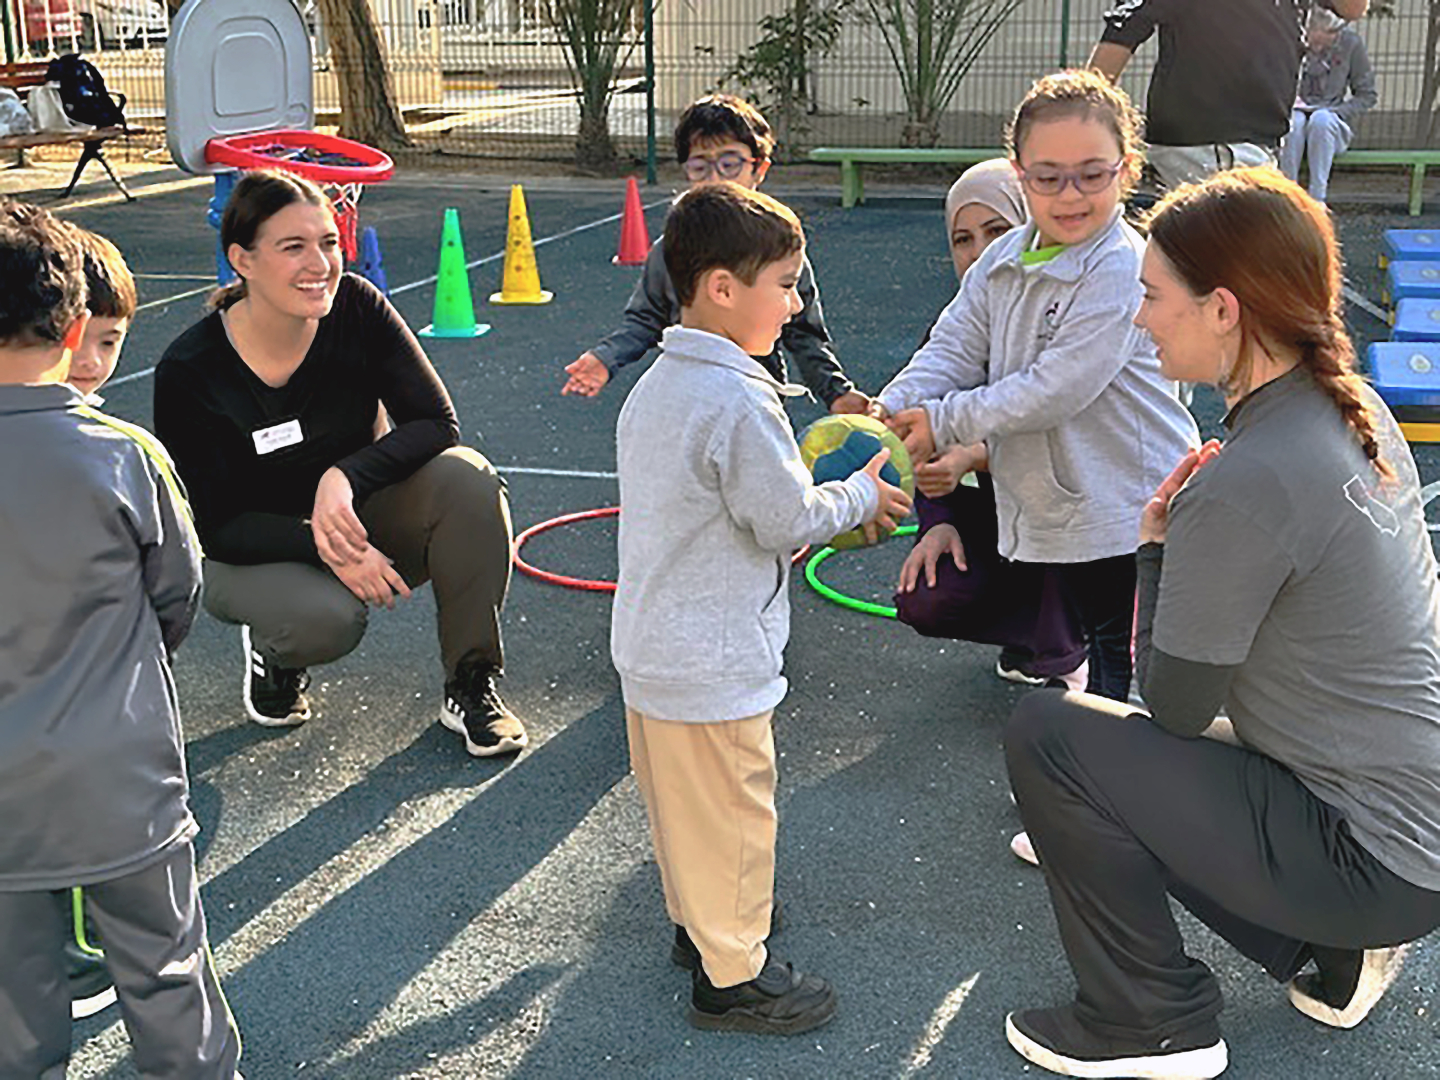 Chico State students and educators interact with children on a playground at a school in the UAE.